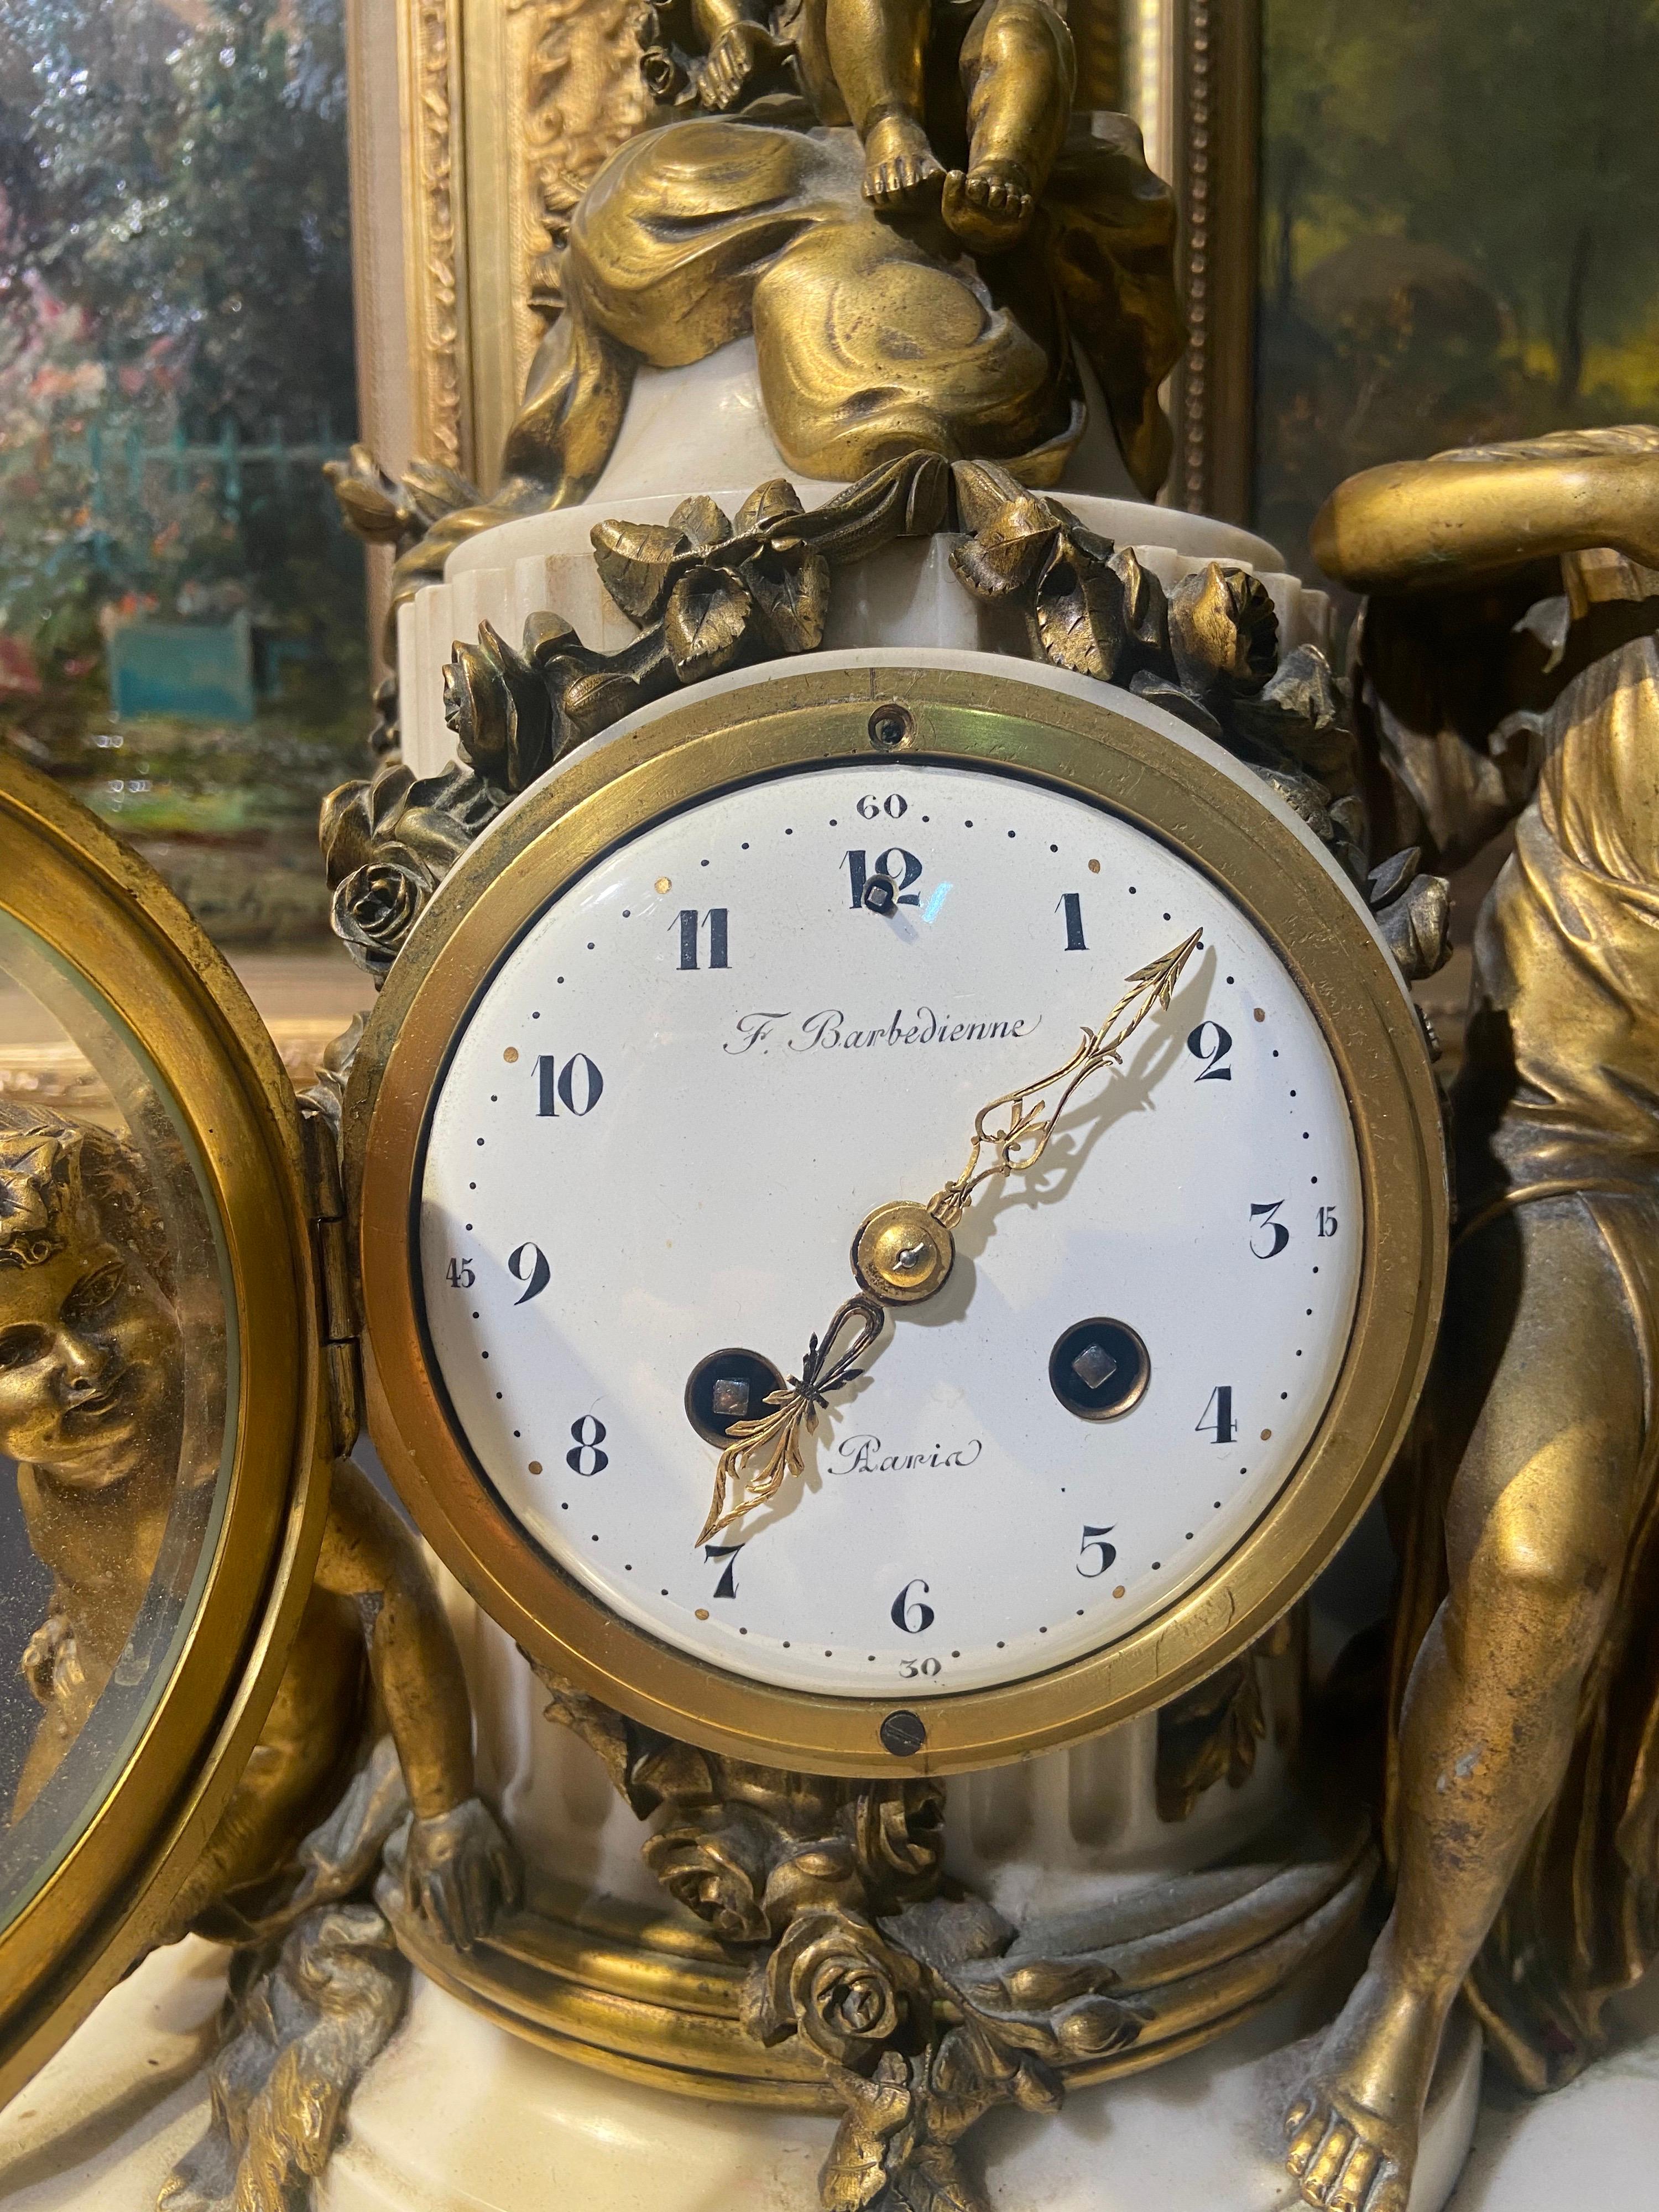 19th Century Rare French Mantel Clock by F. Barbedienne with Bronze Figures For Sale 1